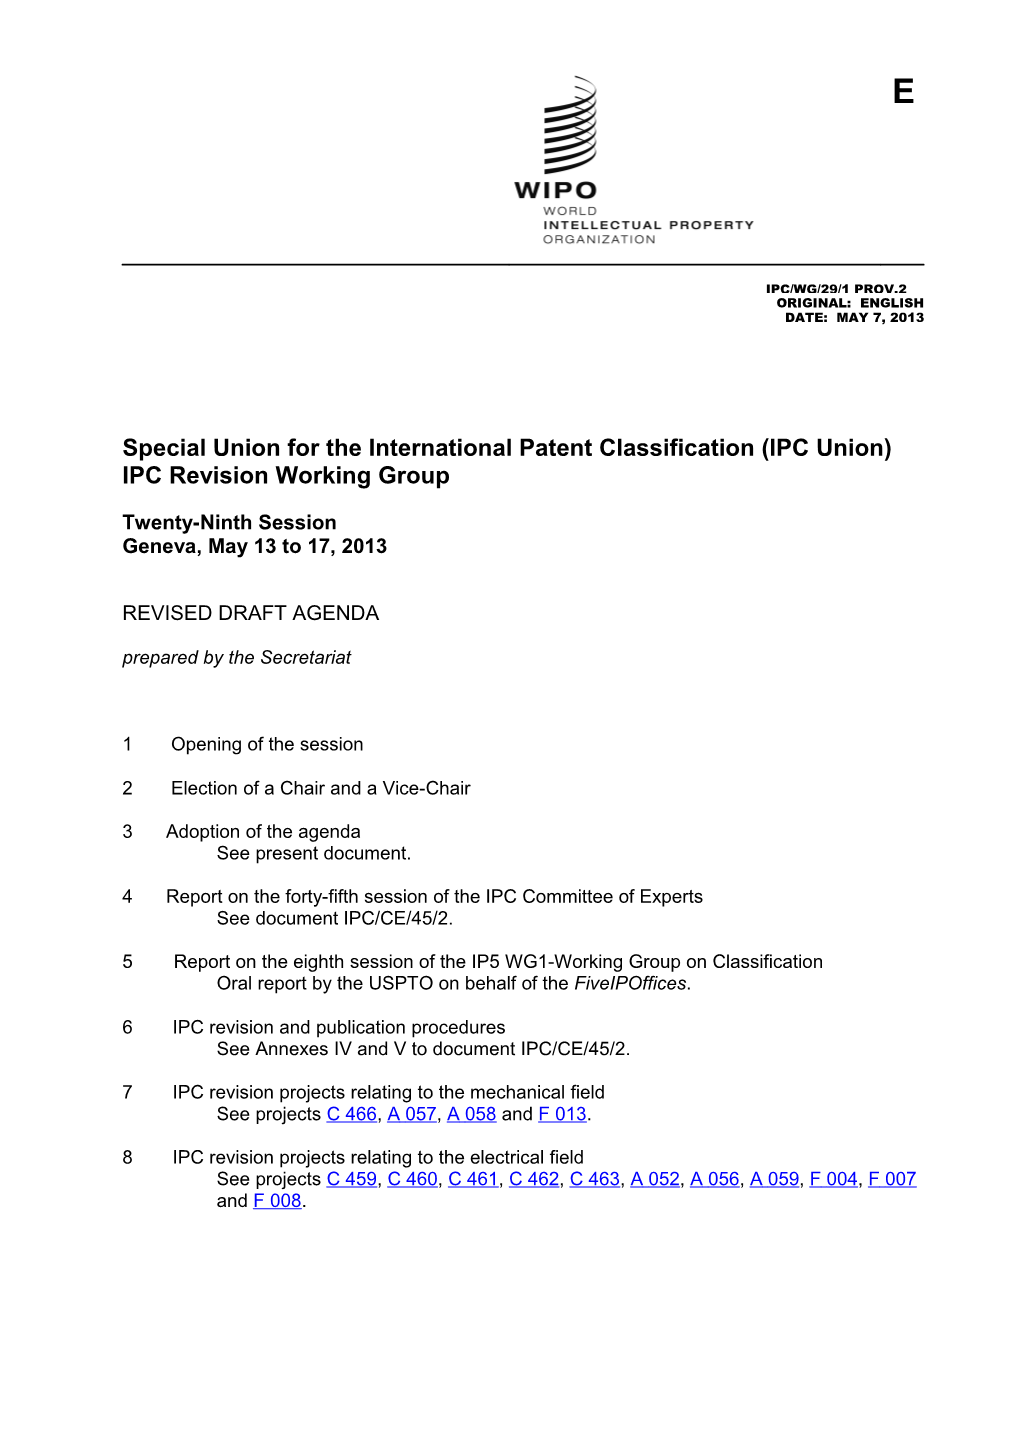 Document IPC/WG/29/1 Prov.2, Revised Draft Agenda, 29Th Session, IPC Revision Working Group